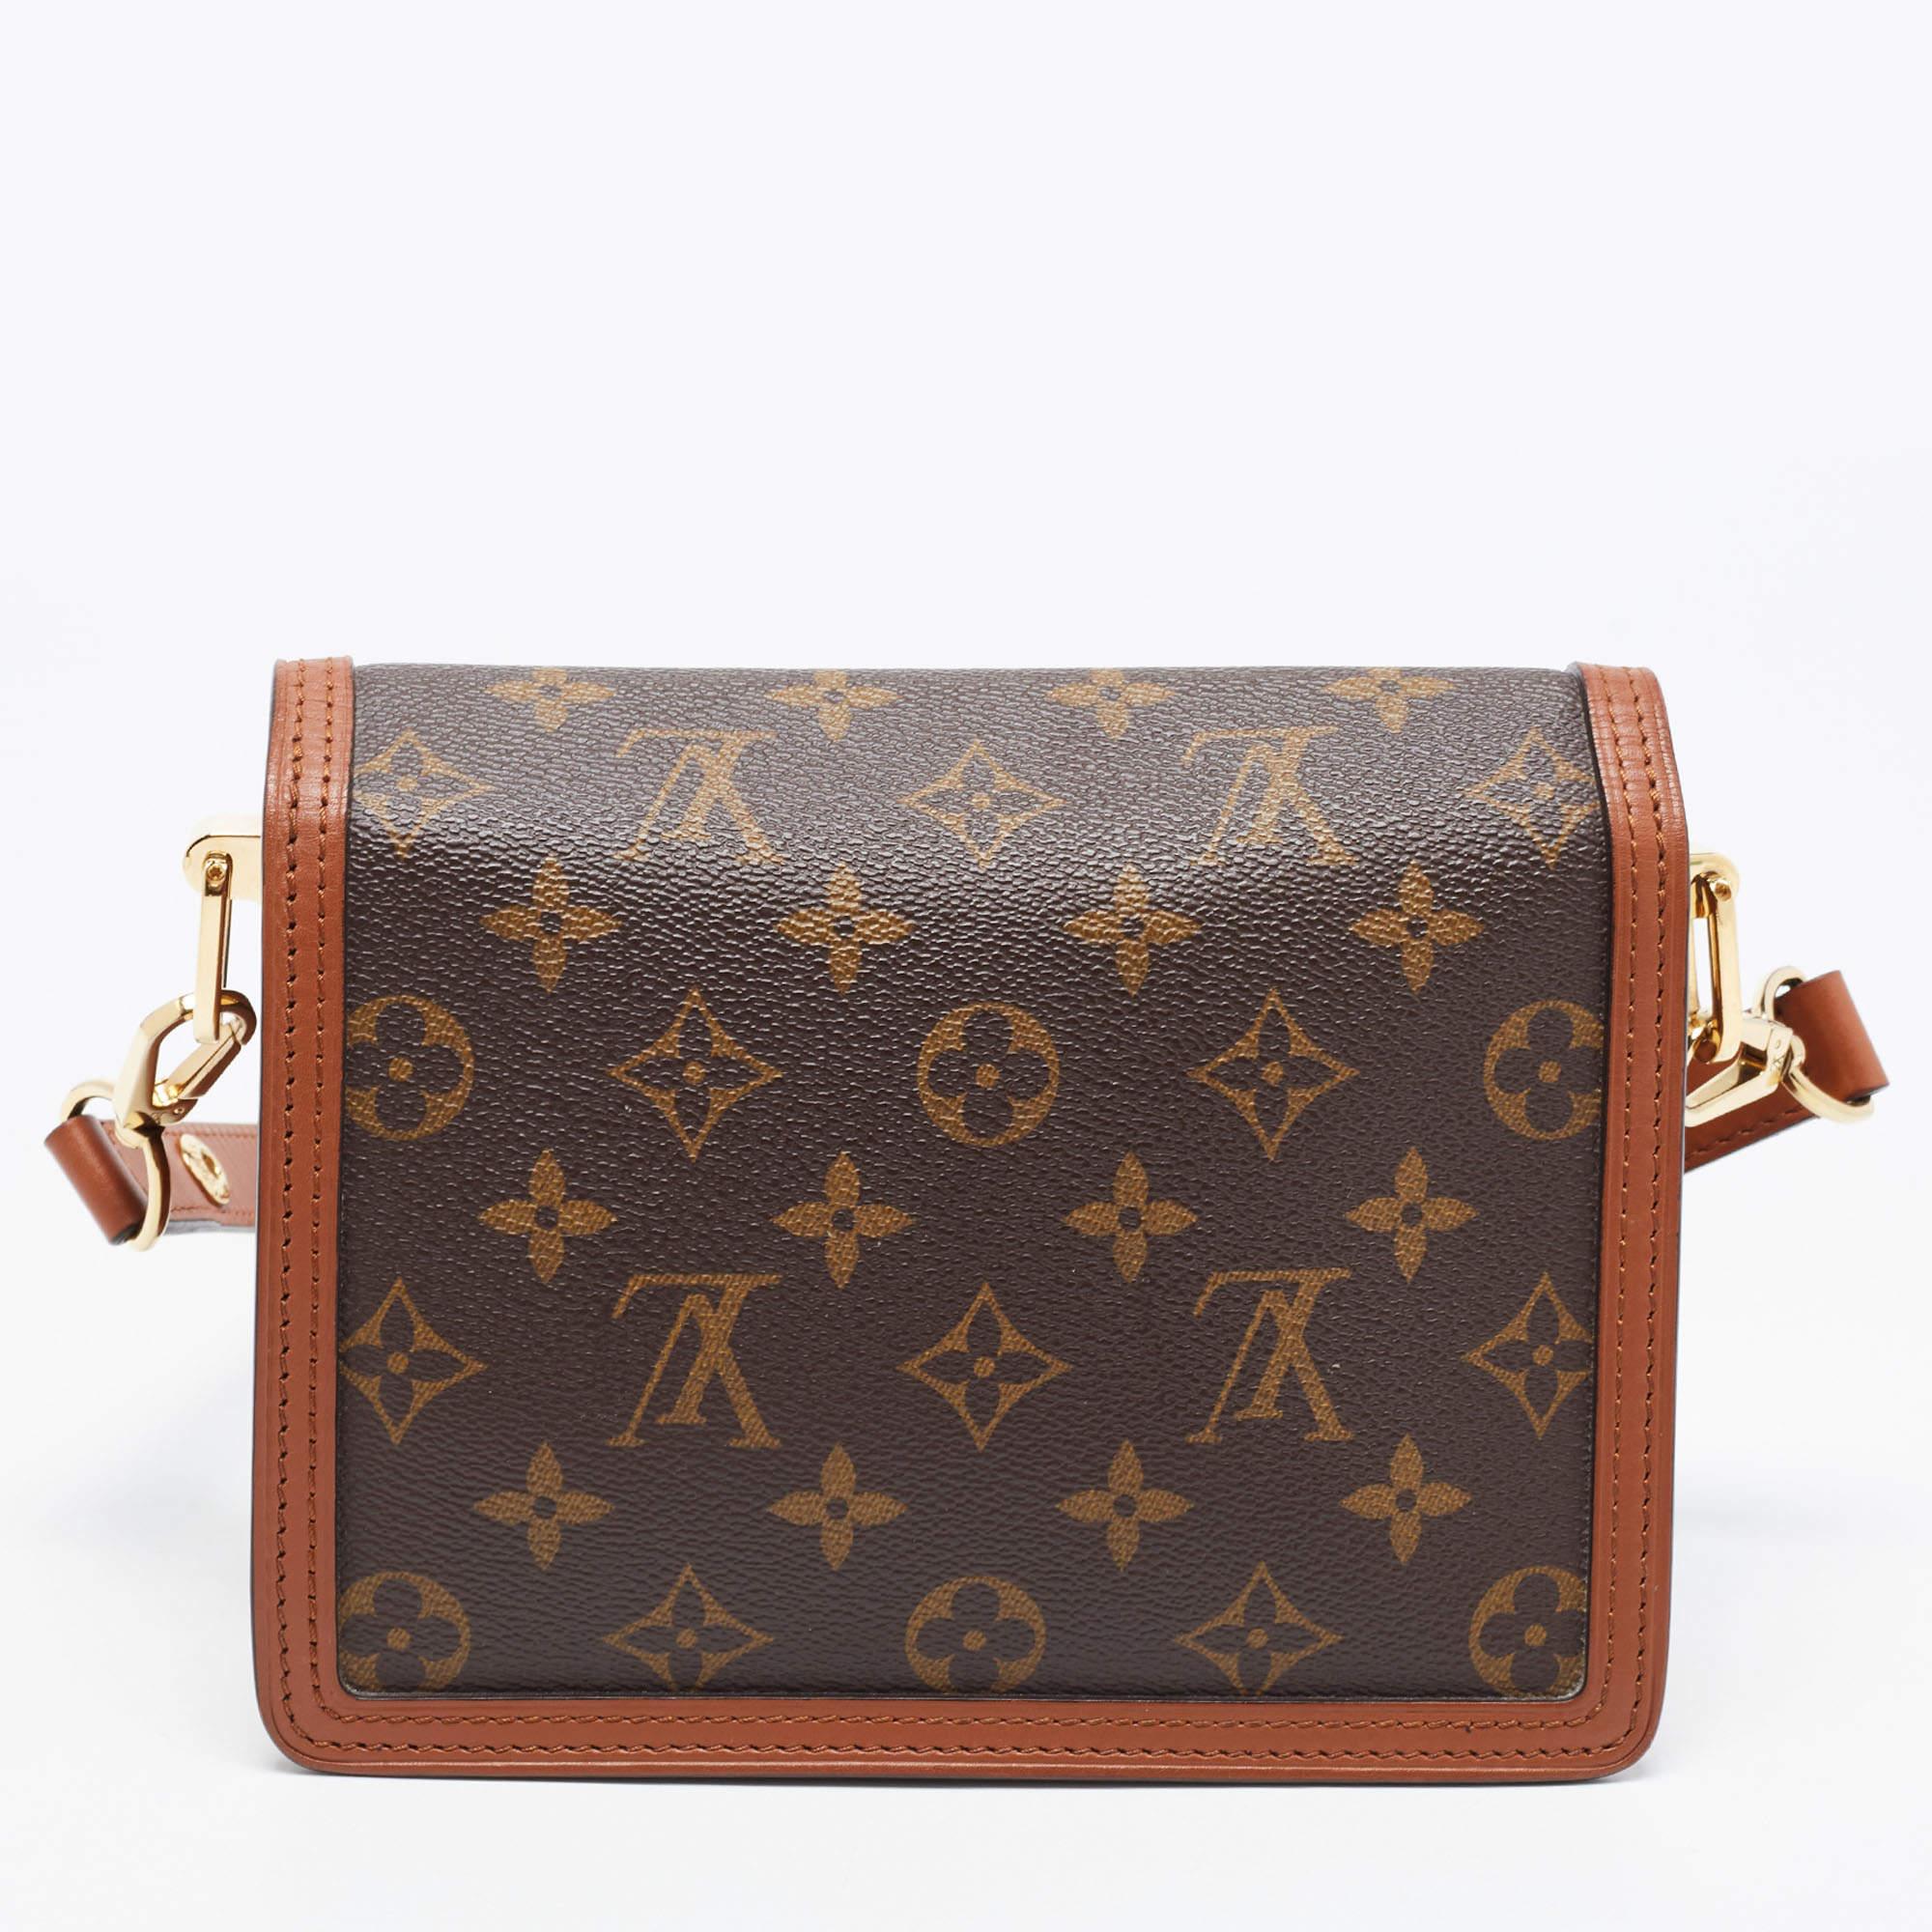 This stylish Dauphine Mini bag carries the signature elements that Louis Vuitton is so popular for. Crafted in Italy, it is made from the brand's Monogram Reverse canvas and carries gold-tone hardware details. It is finished with a strap.

Includes: